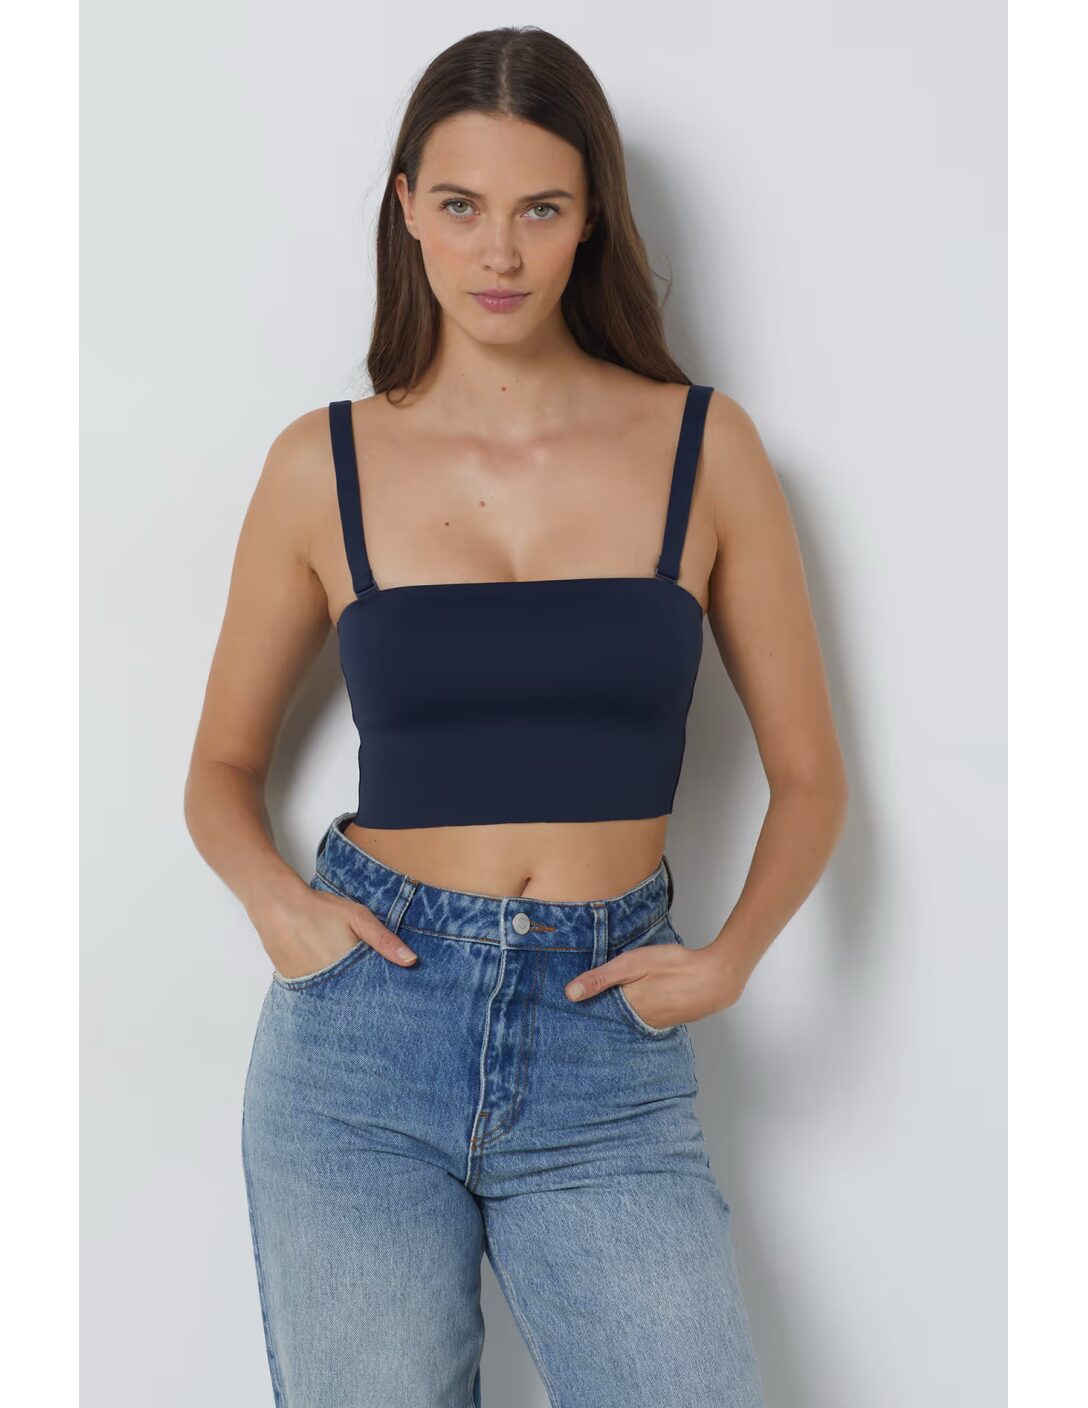 Bra hack for halter tops when you still need a little lift